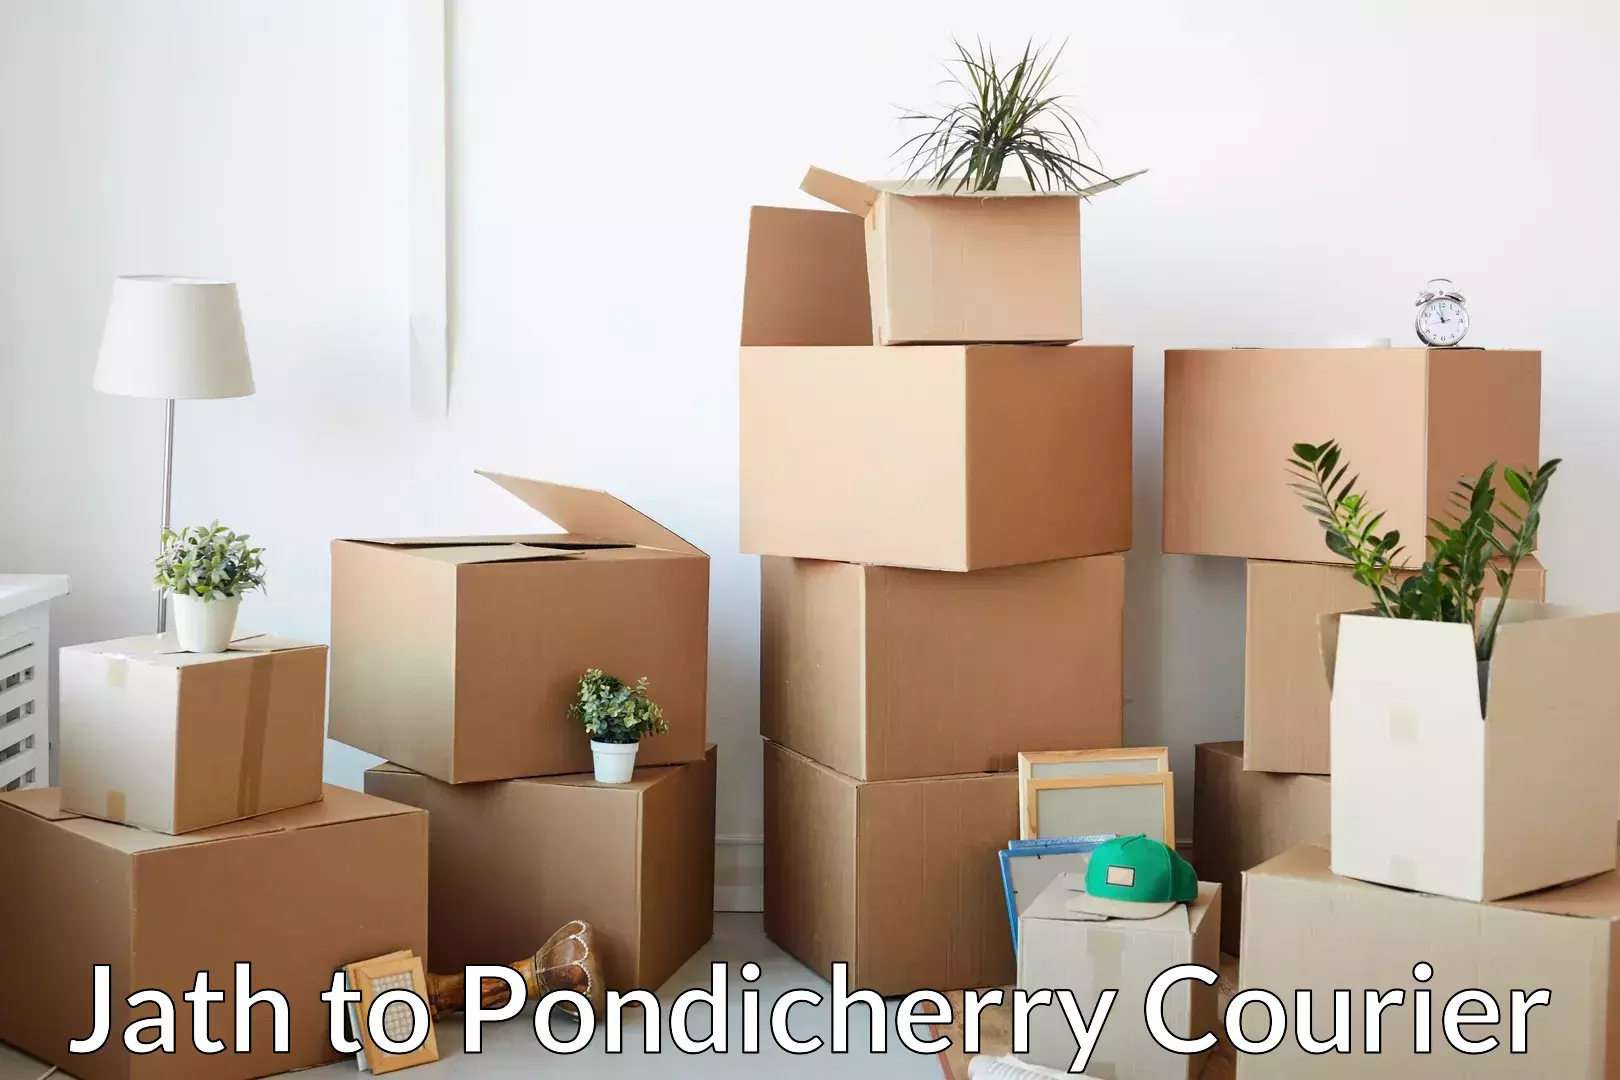 Hassle-free relocation in Jath to Pondicherry